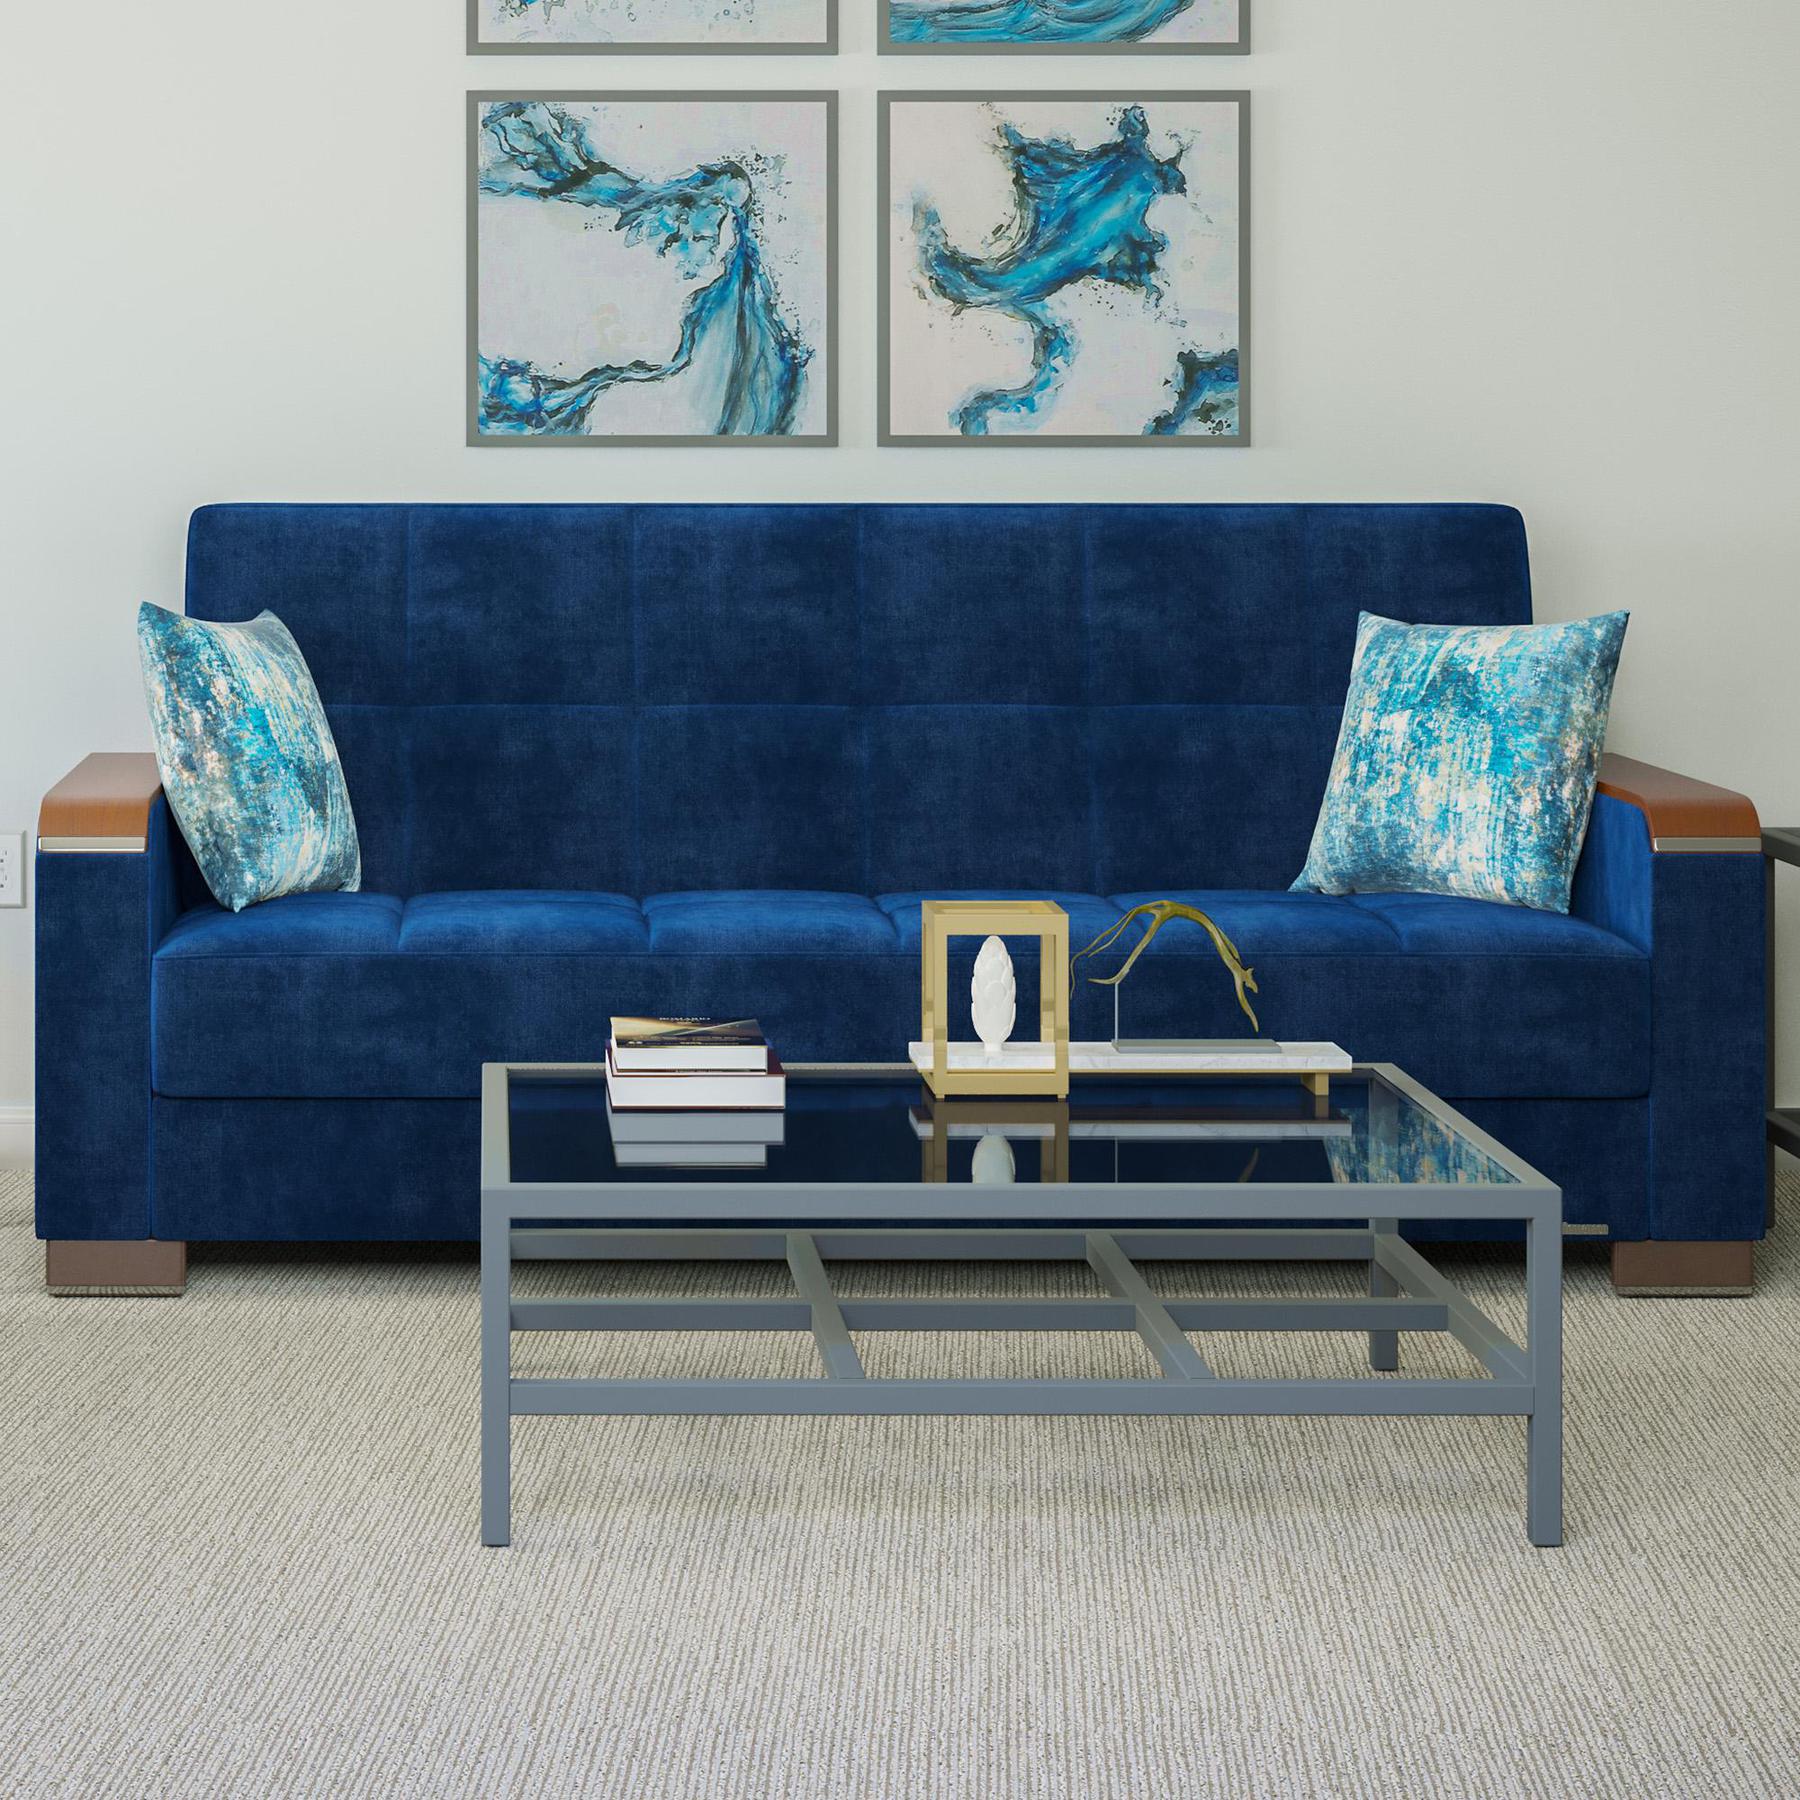 Modern design, True Blue , Microfiber upholstered convertible sleeper Sofabed with underseat storage from Voyage Luxe by Ottomanson in living room lifestyle setting by itself. This Sofabed measures 90 inches width by 36 inches depth by 41 inches height.